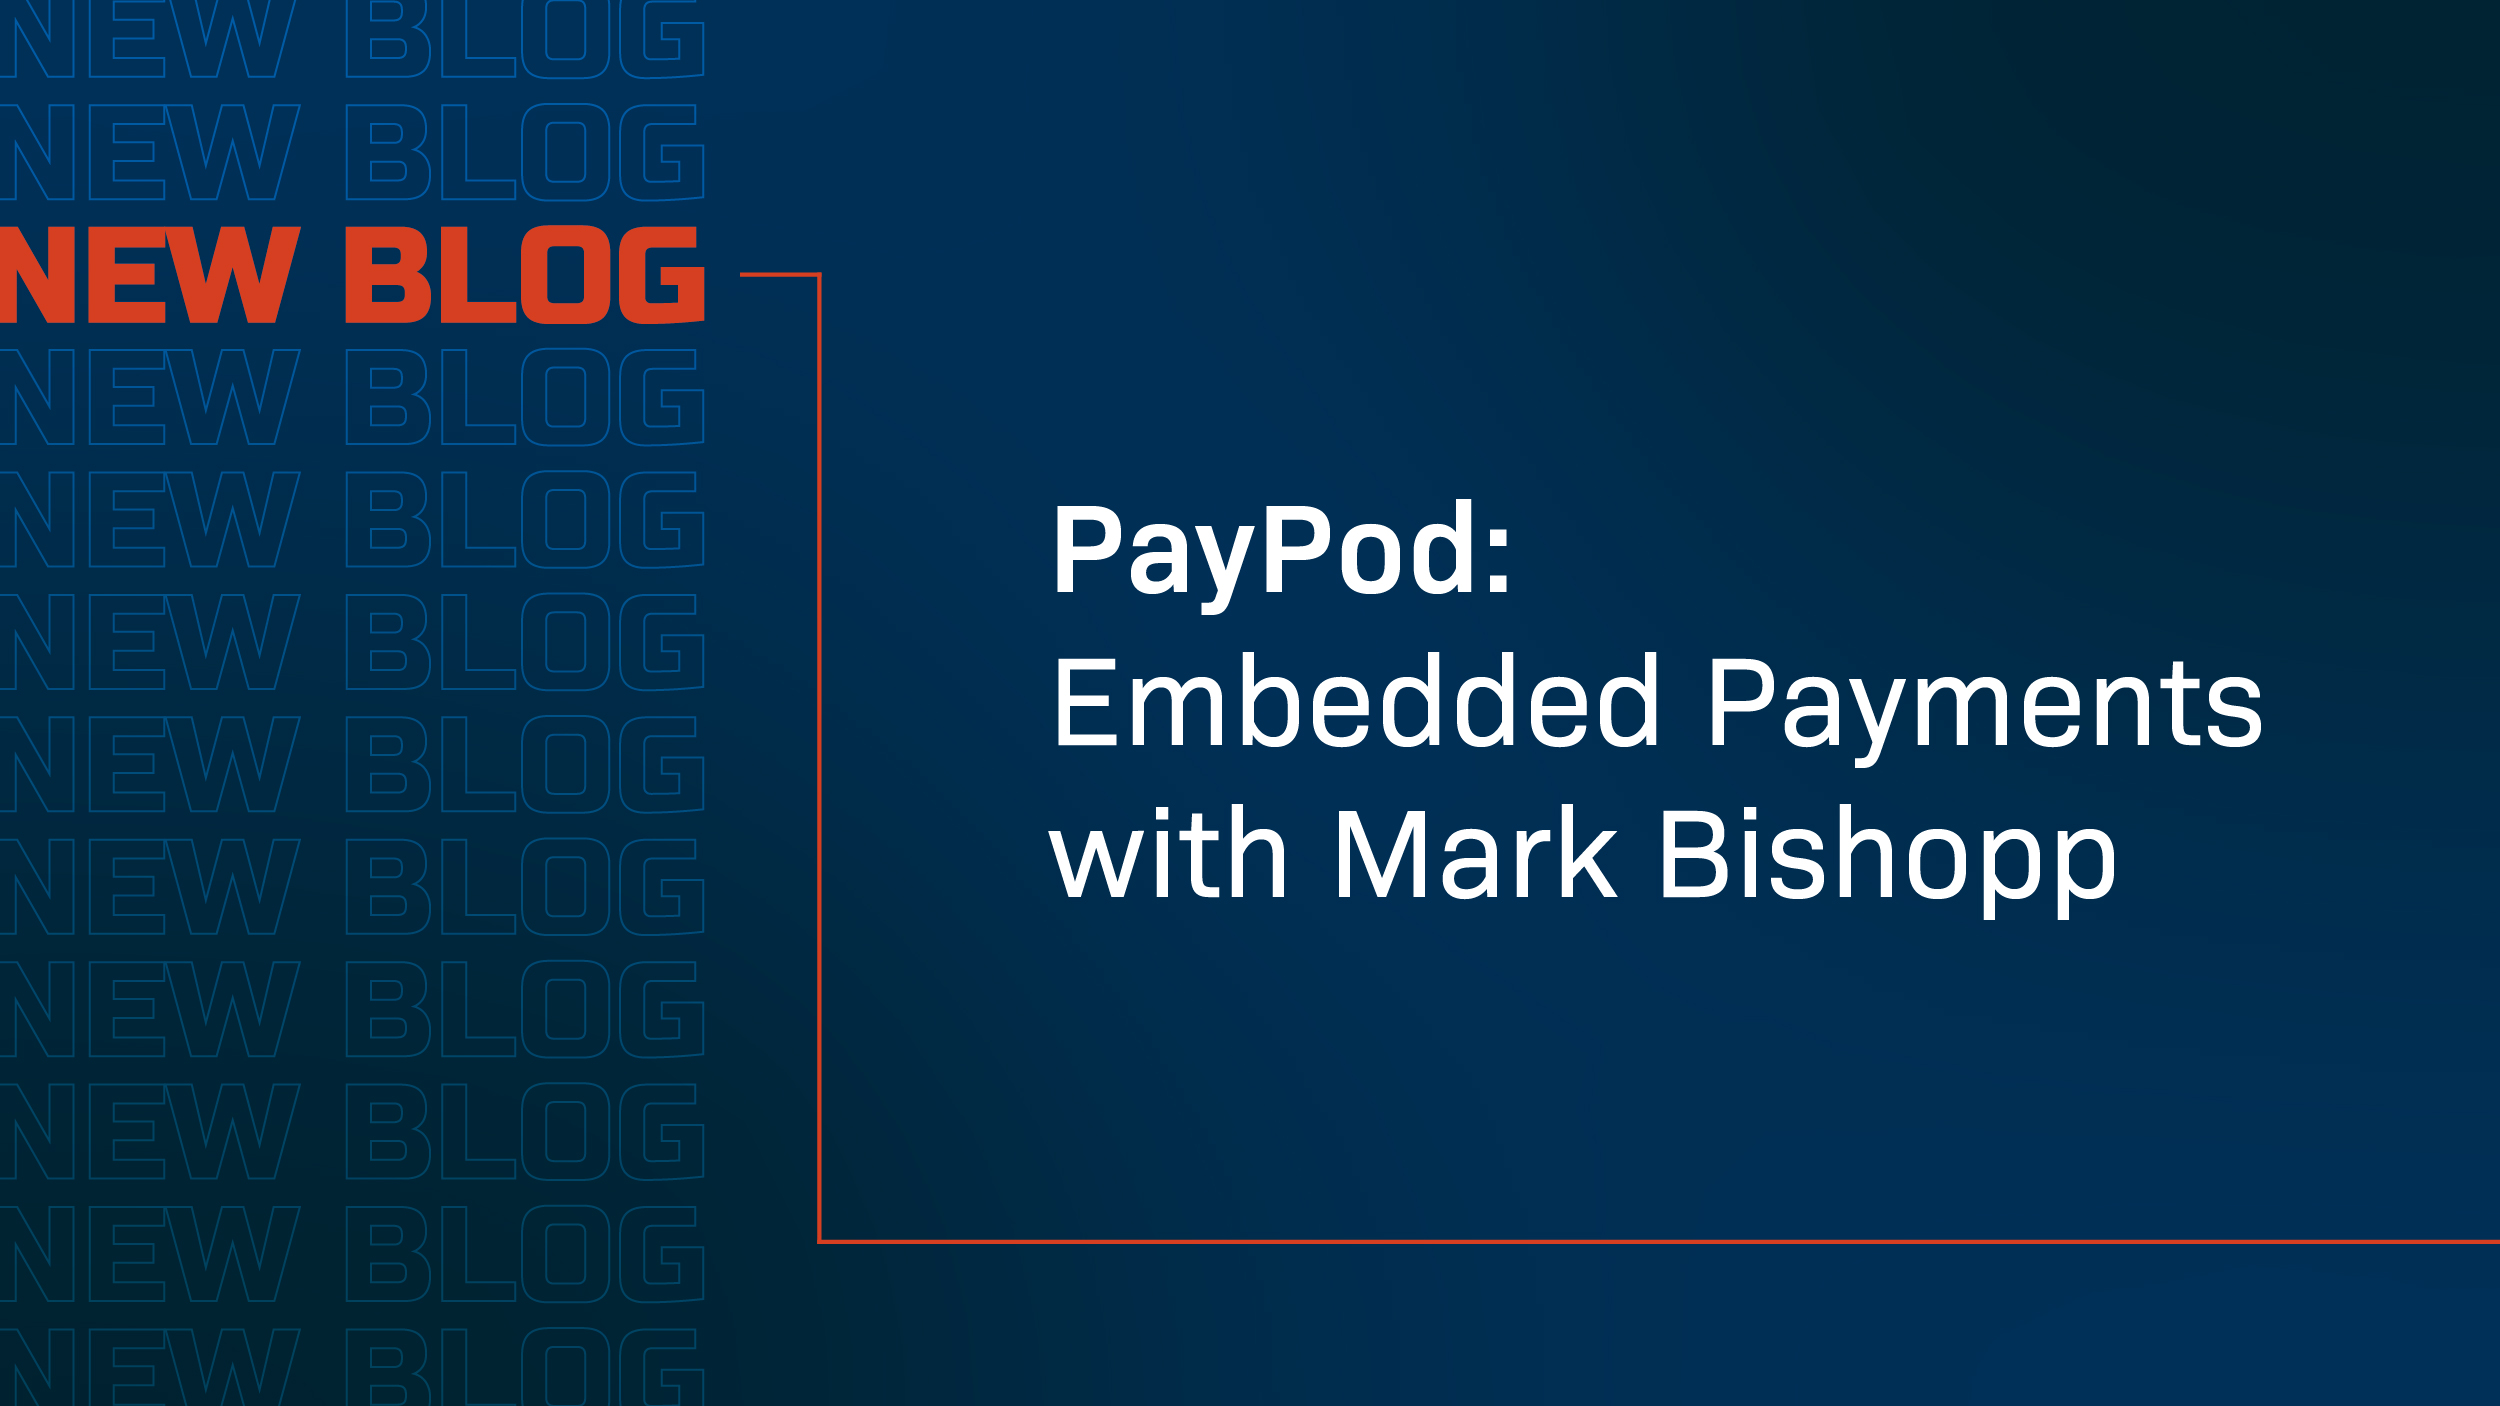 PayPod: Embedded Payments with Mark Bishopp  - Featured Image